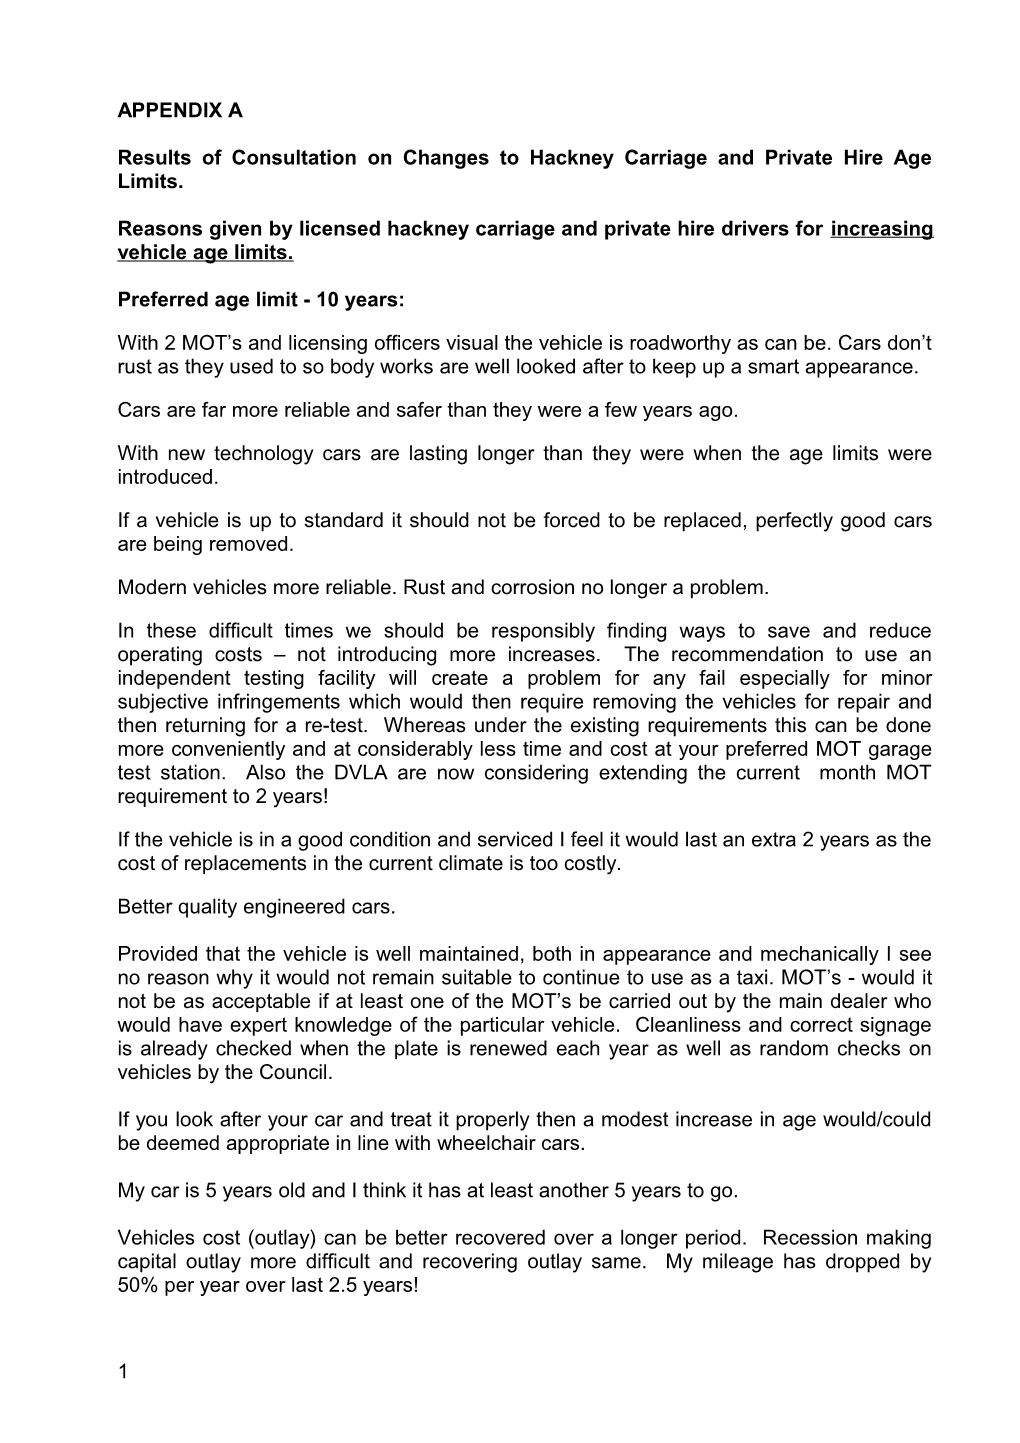 Results of Consultation on Changes to Hackney Carriage and Private Hire Age Limits